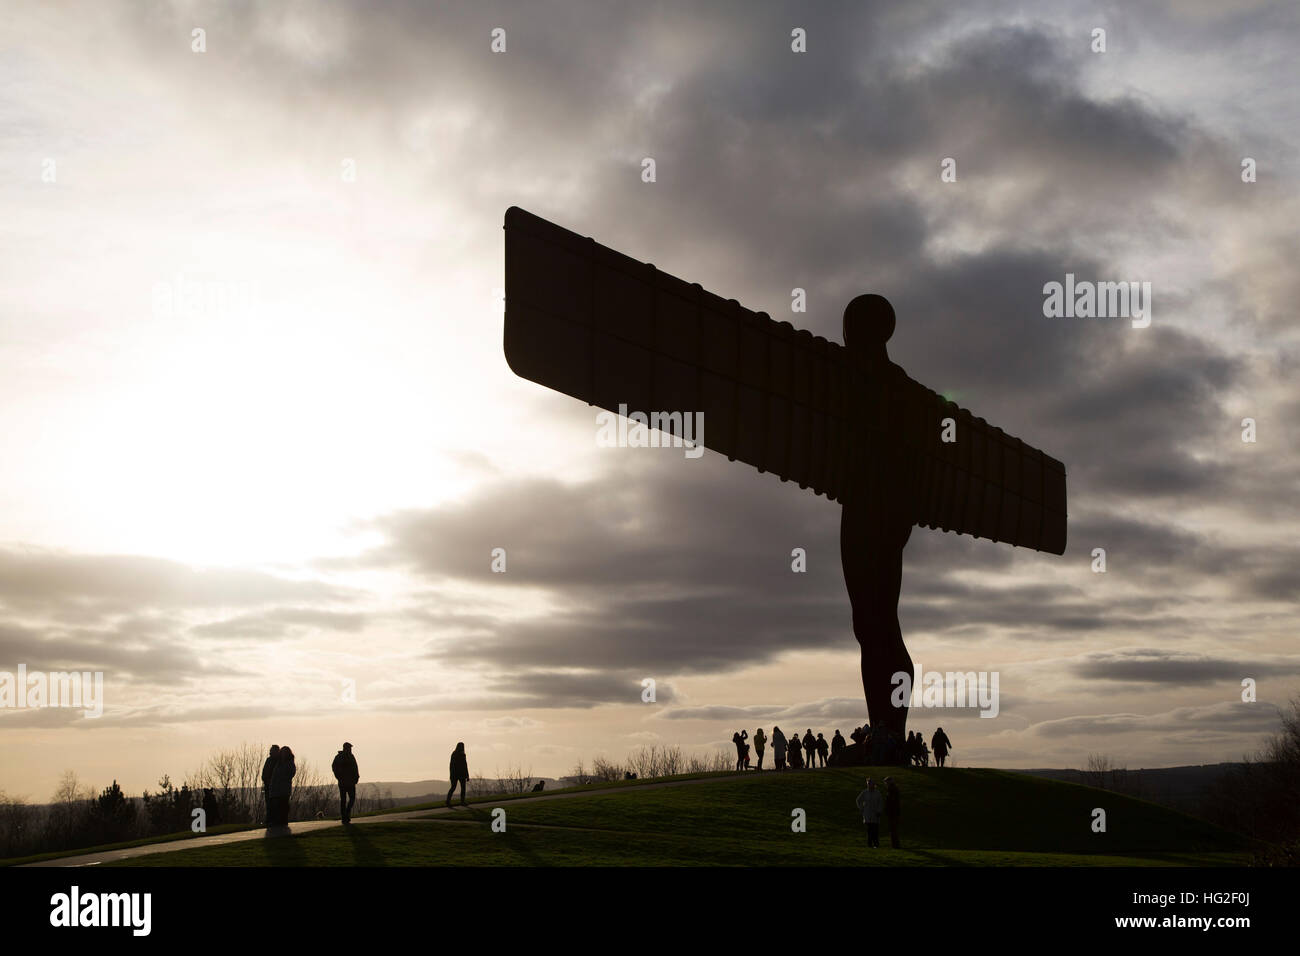 People visit the Angel of the North in Gateshead, England. The sculpture, designed by artist Antony Gormley, was unveiled in 1998. Stock Photo